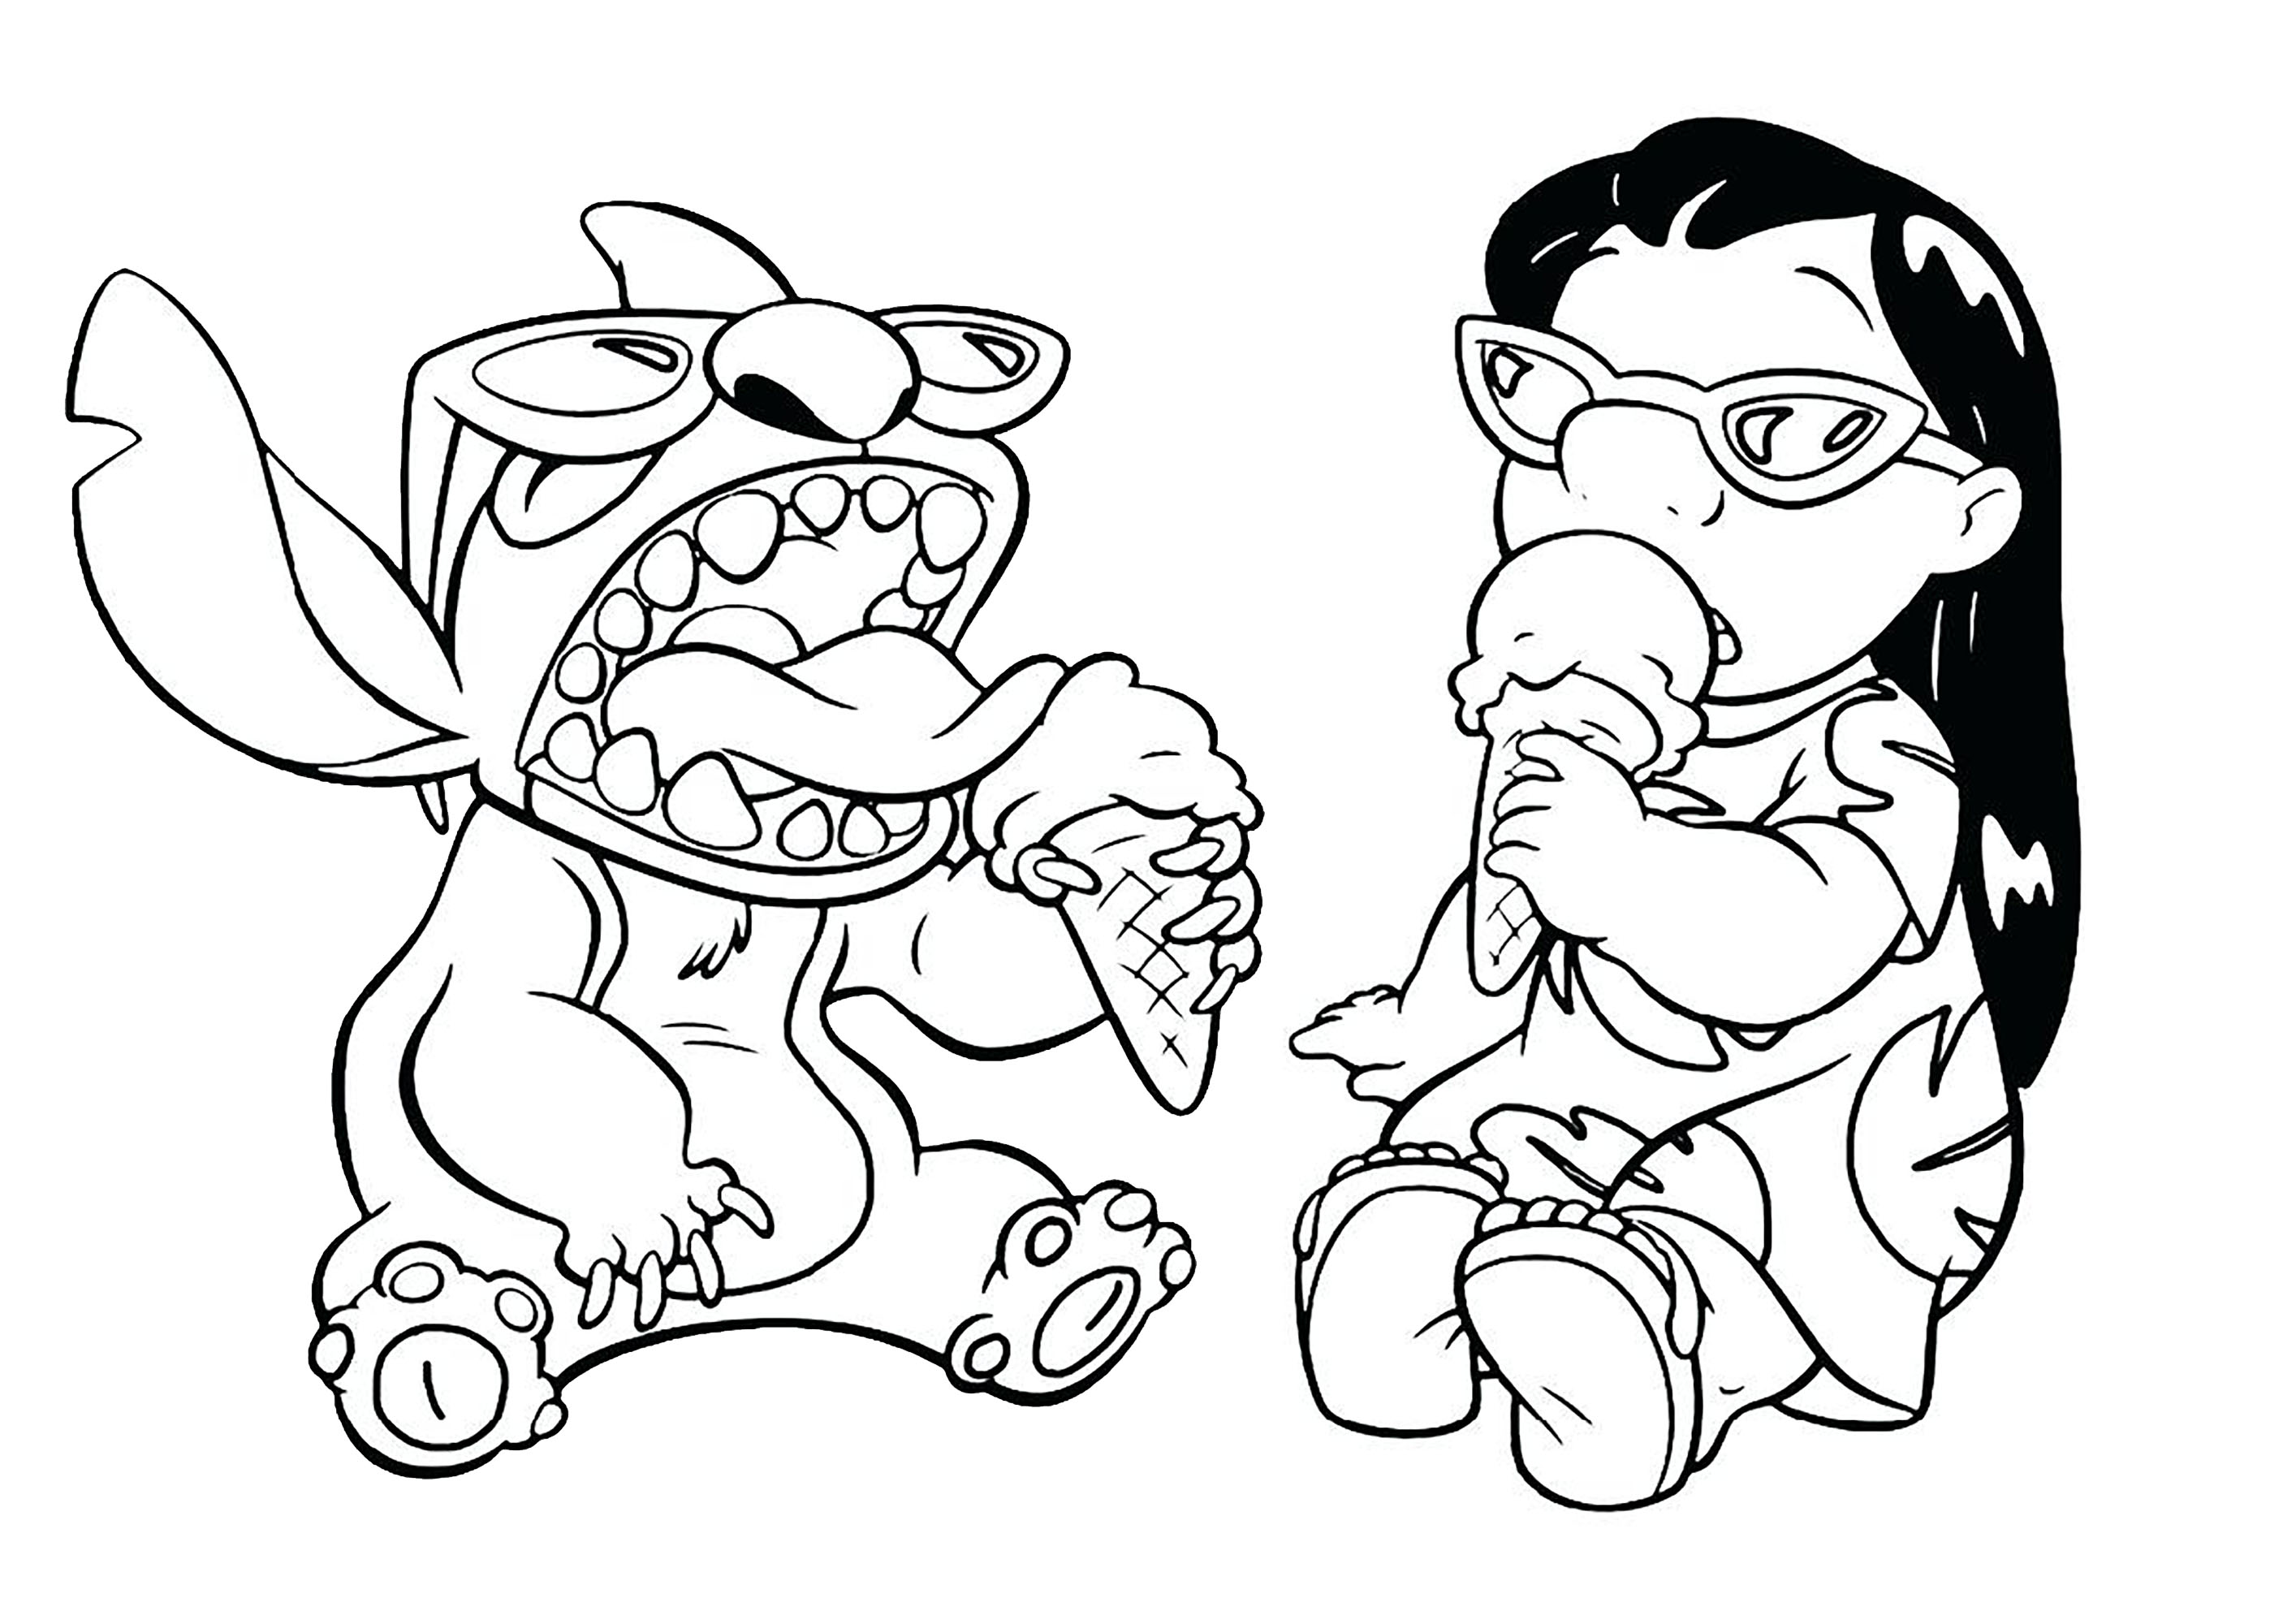 Lilo and Stitch drawing to download and print for children